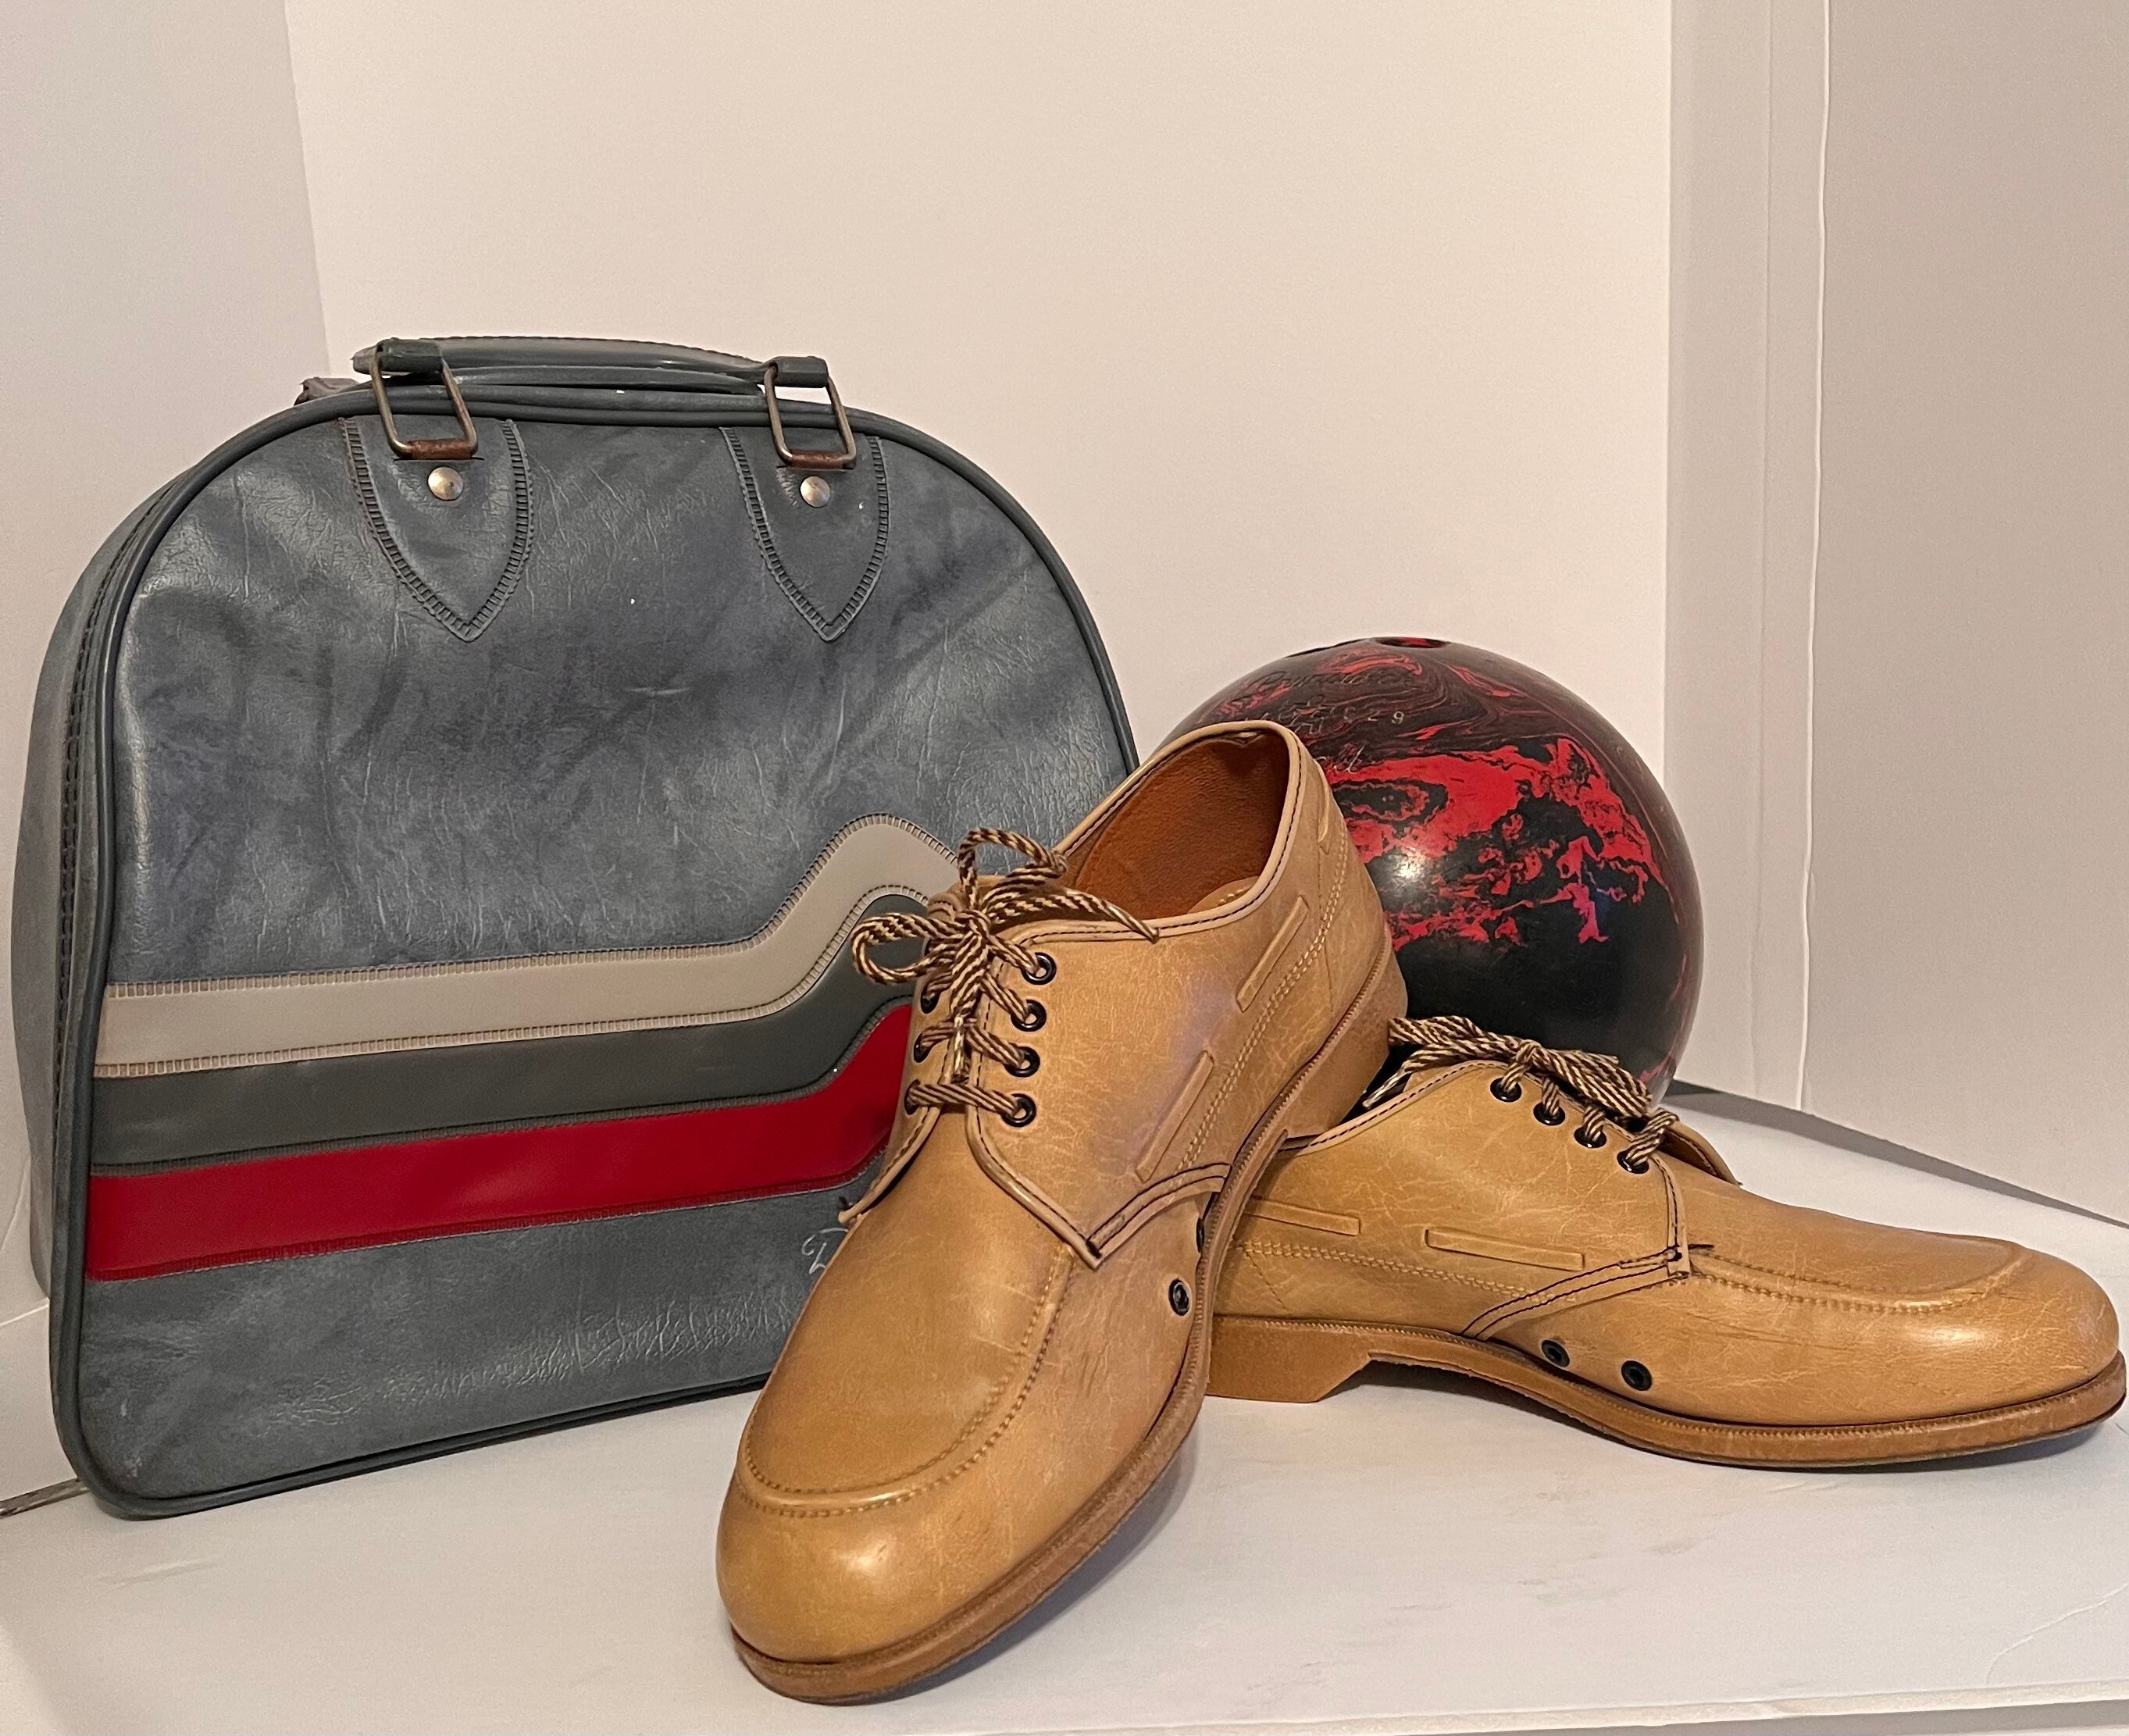 Vintage bowling bag with ball and shoes — Kitsch, please!